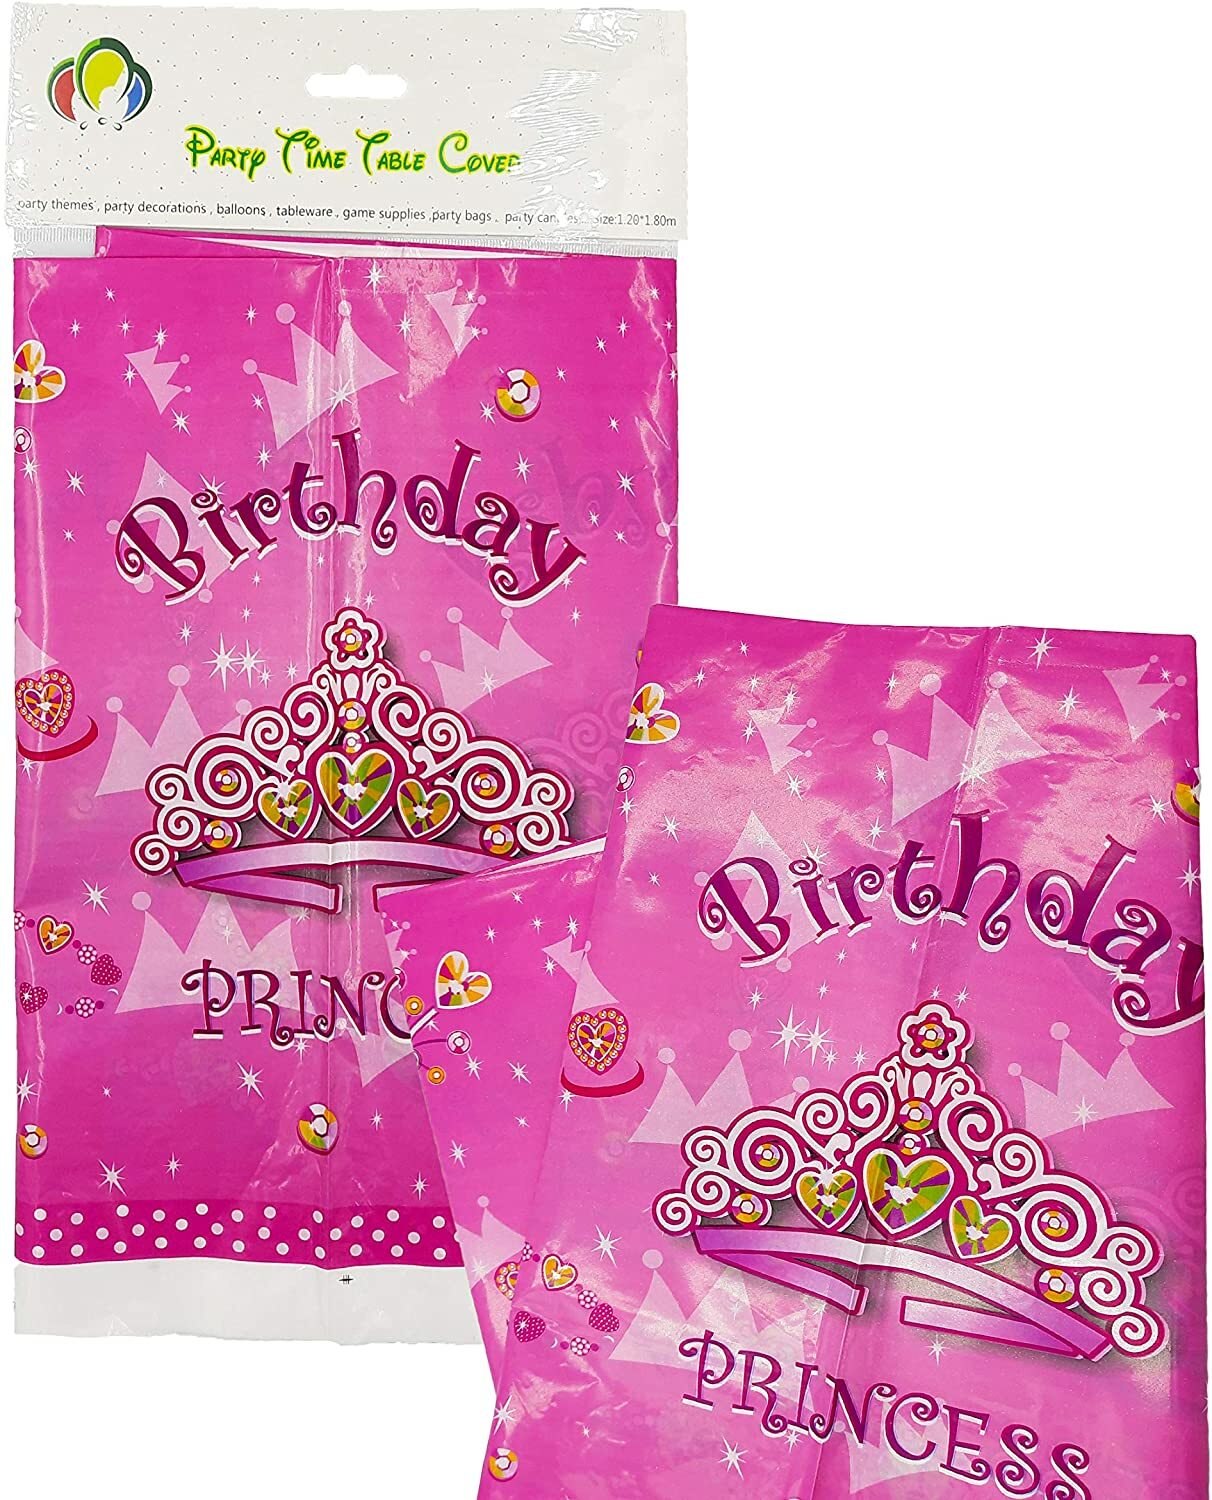 HAPPY BIRTHDAY TABLE COVER - J & C Party Supplies